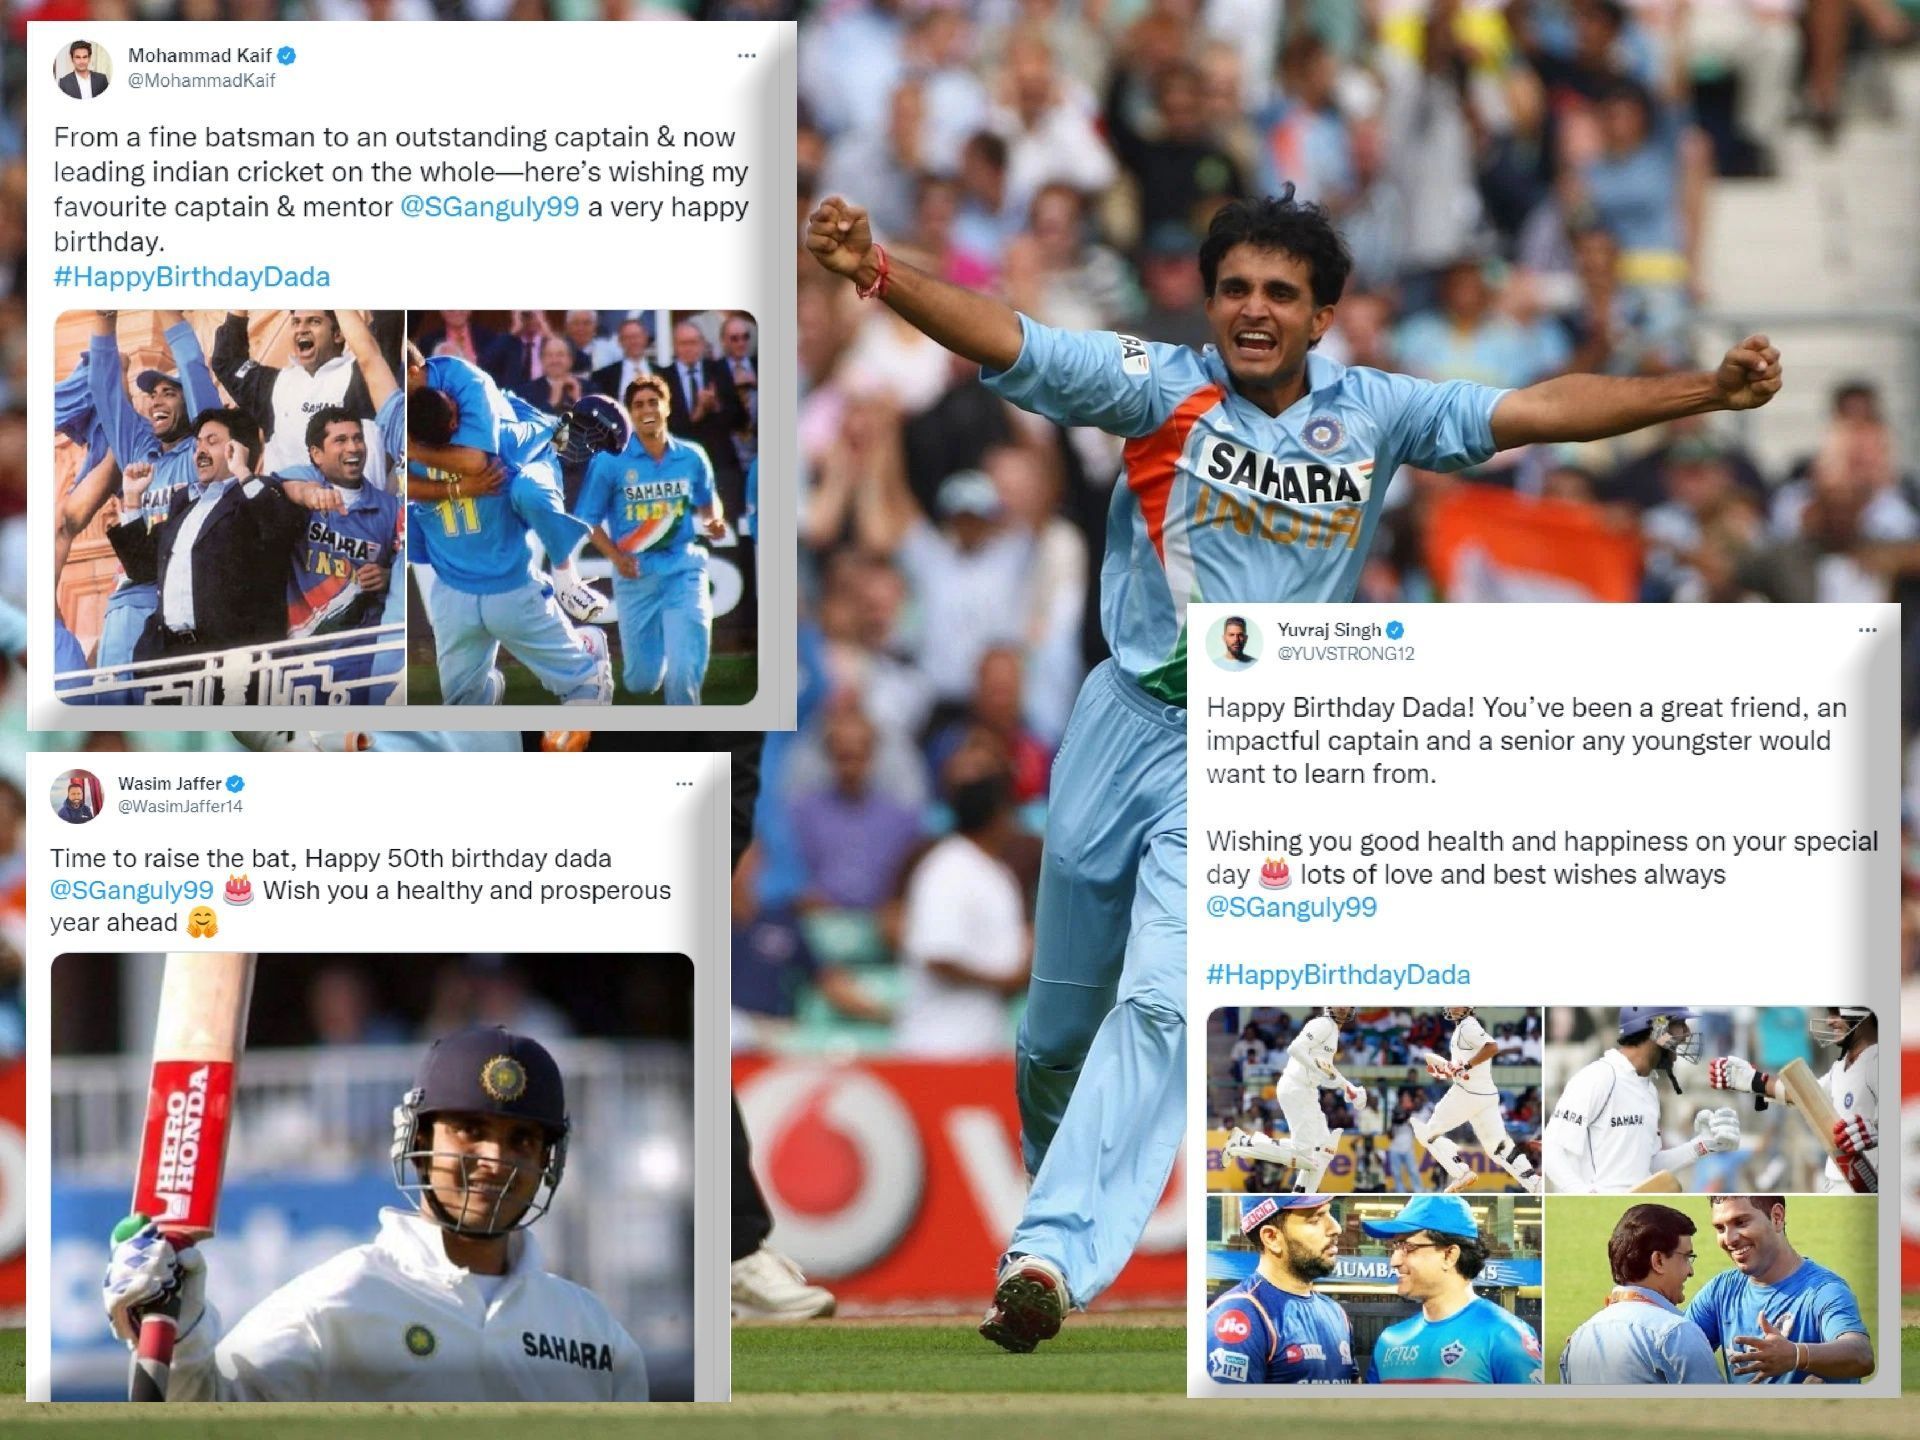 Former India captain Sourav Ganguly is celebrating his 50th birthday today.